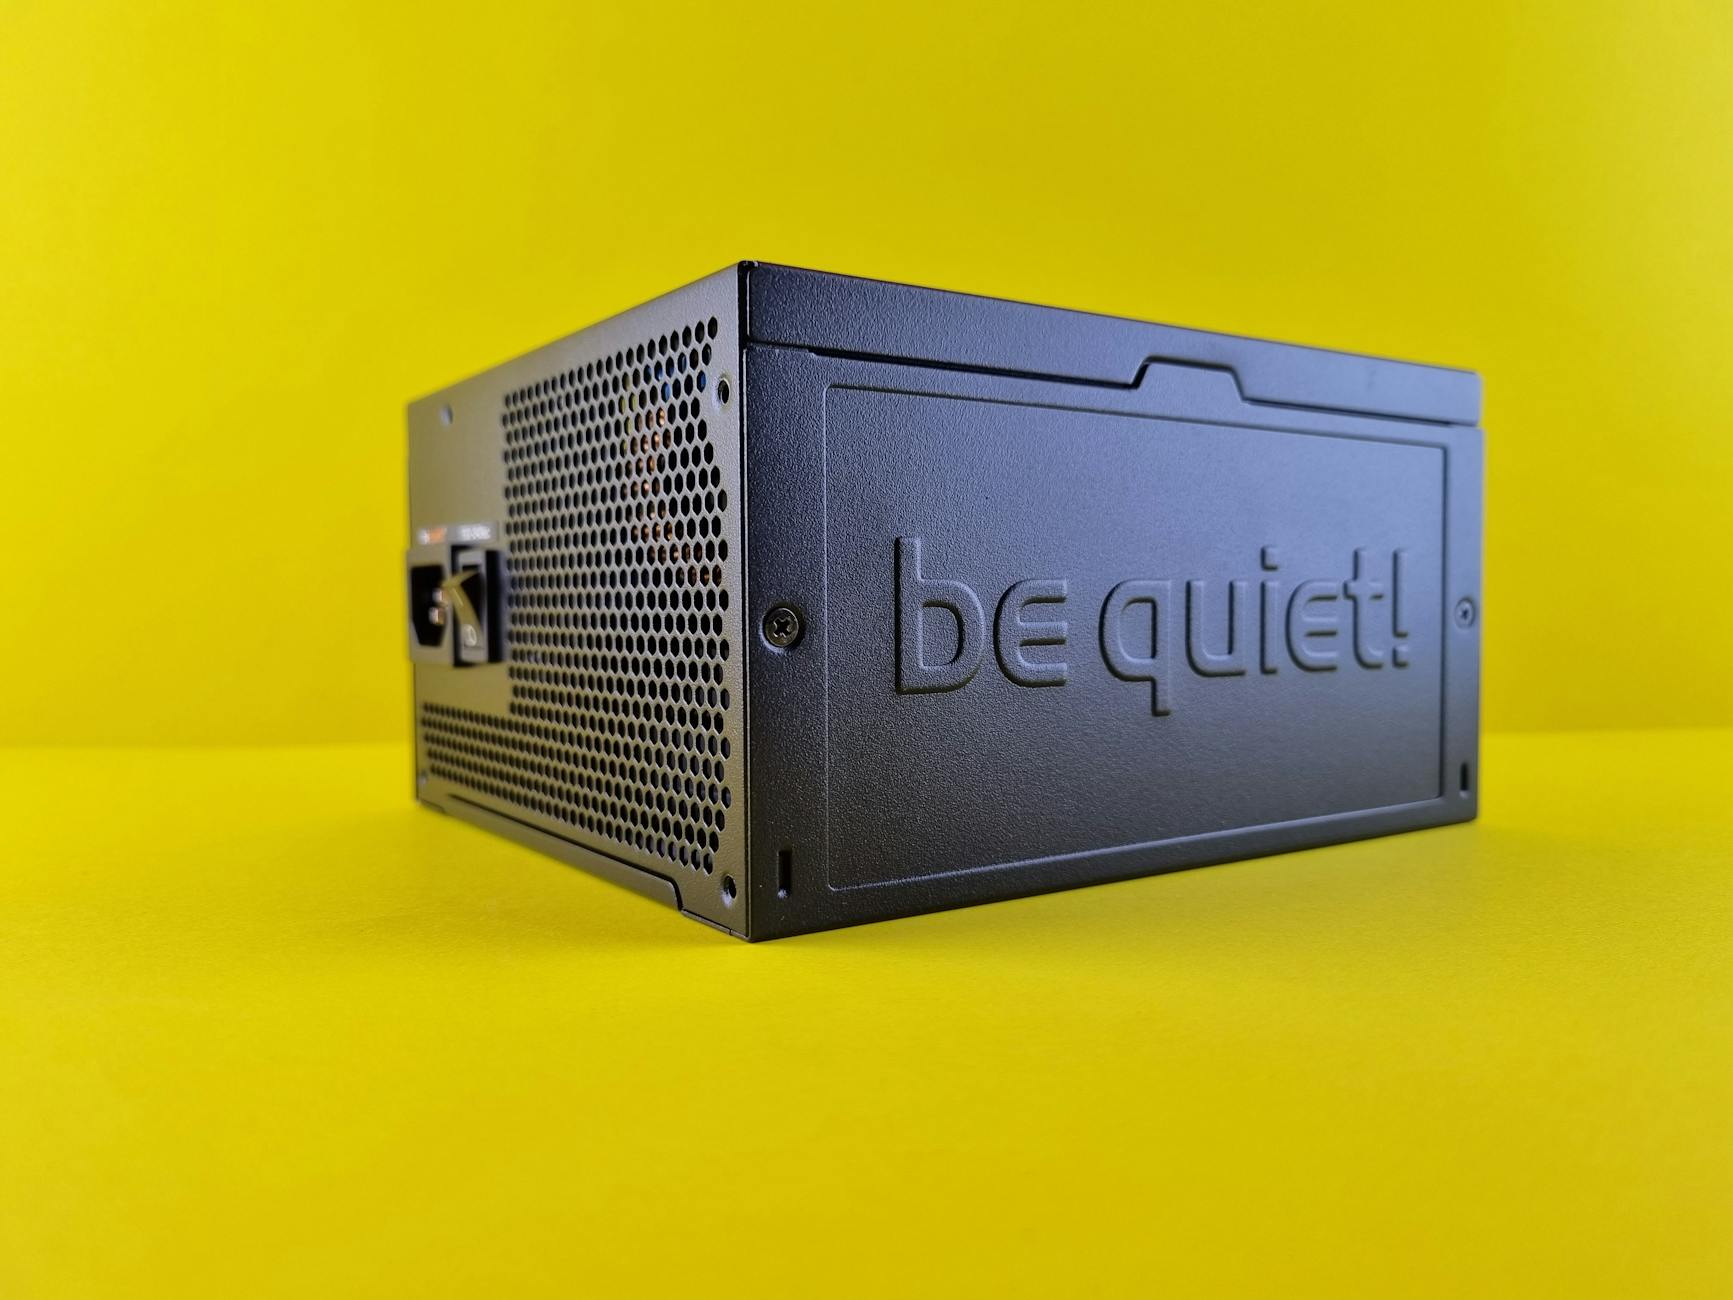 Image of a Power supply unit with a yellow coloured background.